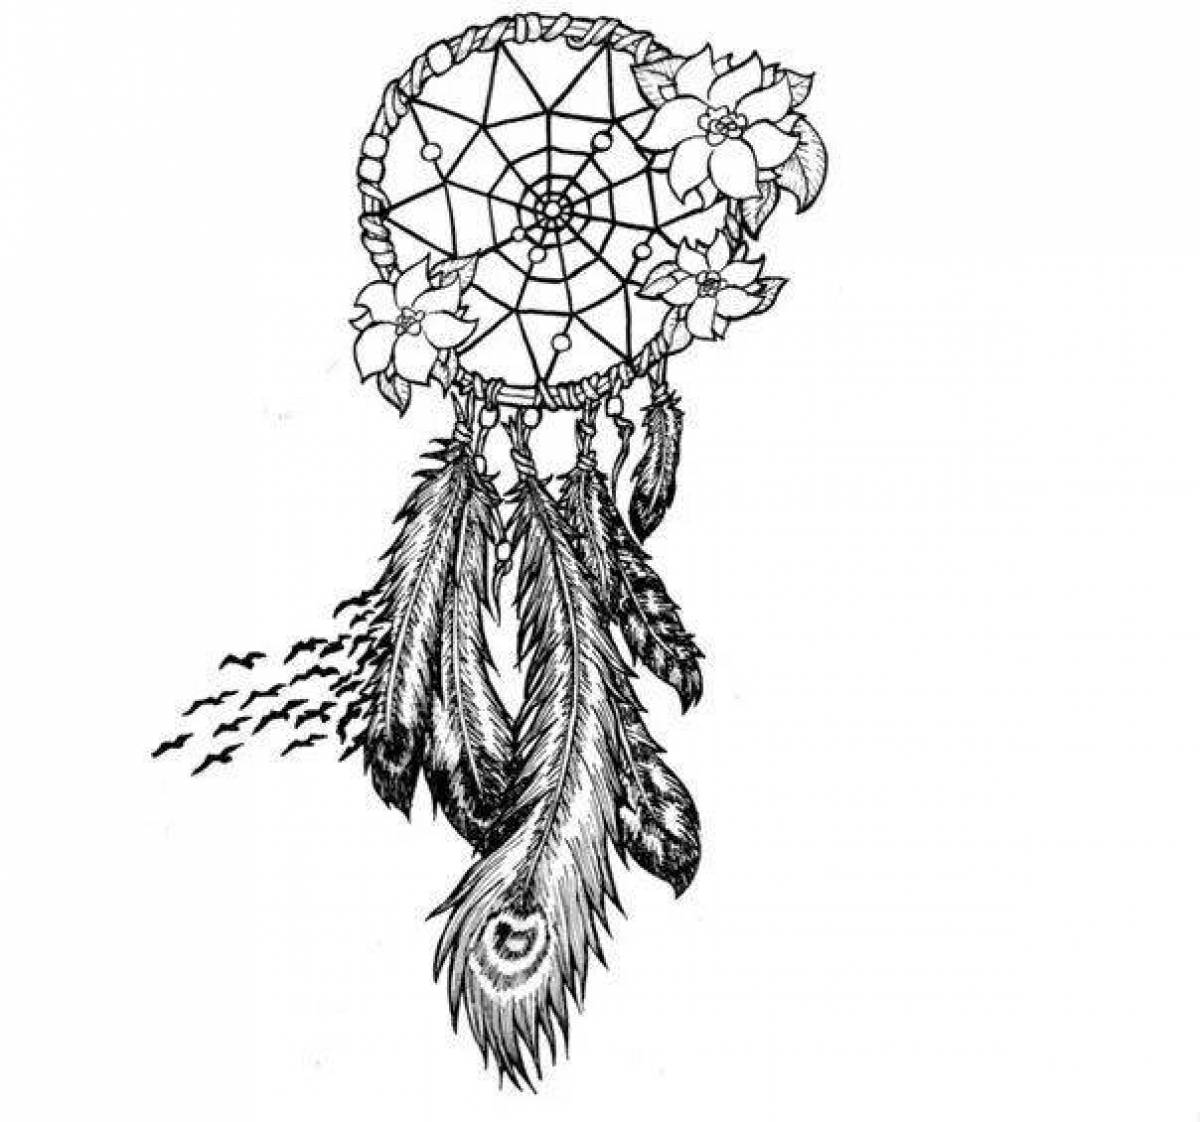 Amazing dreamcatcher coloring page